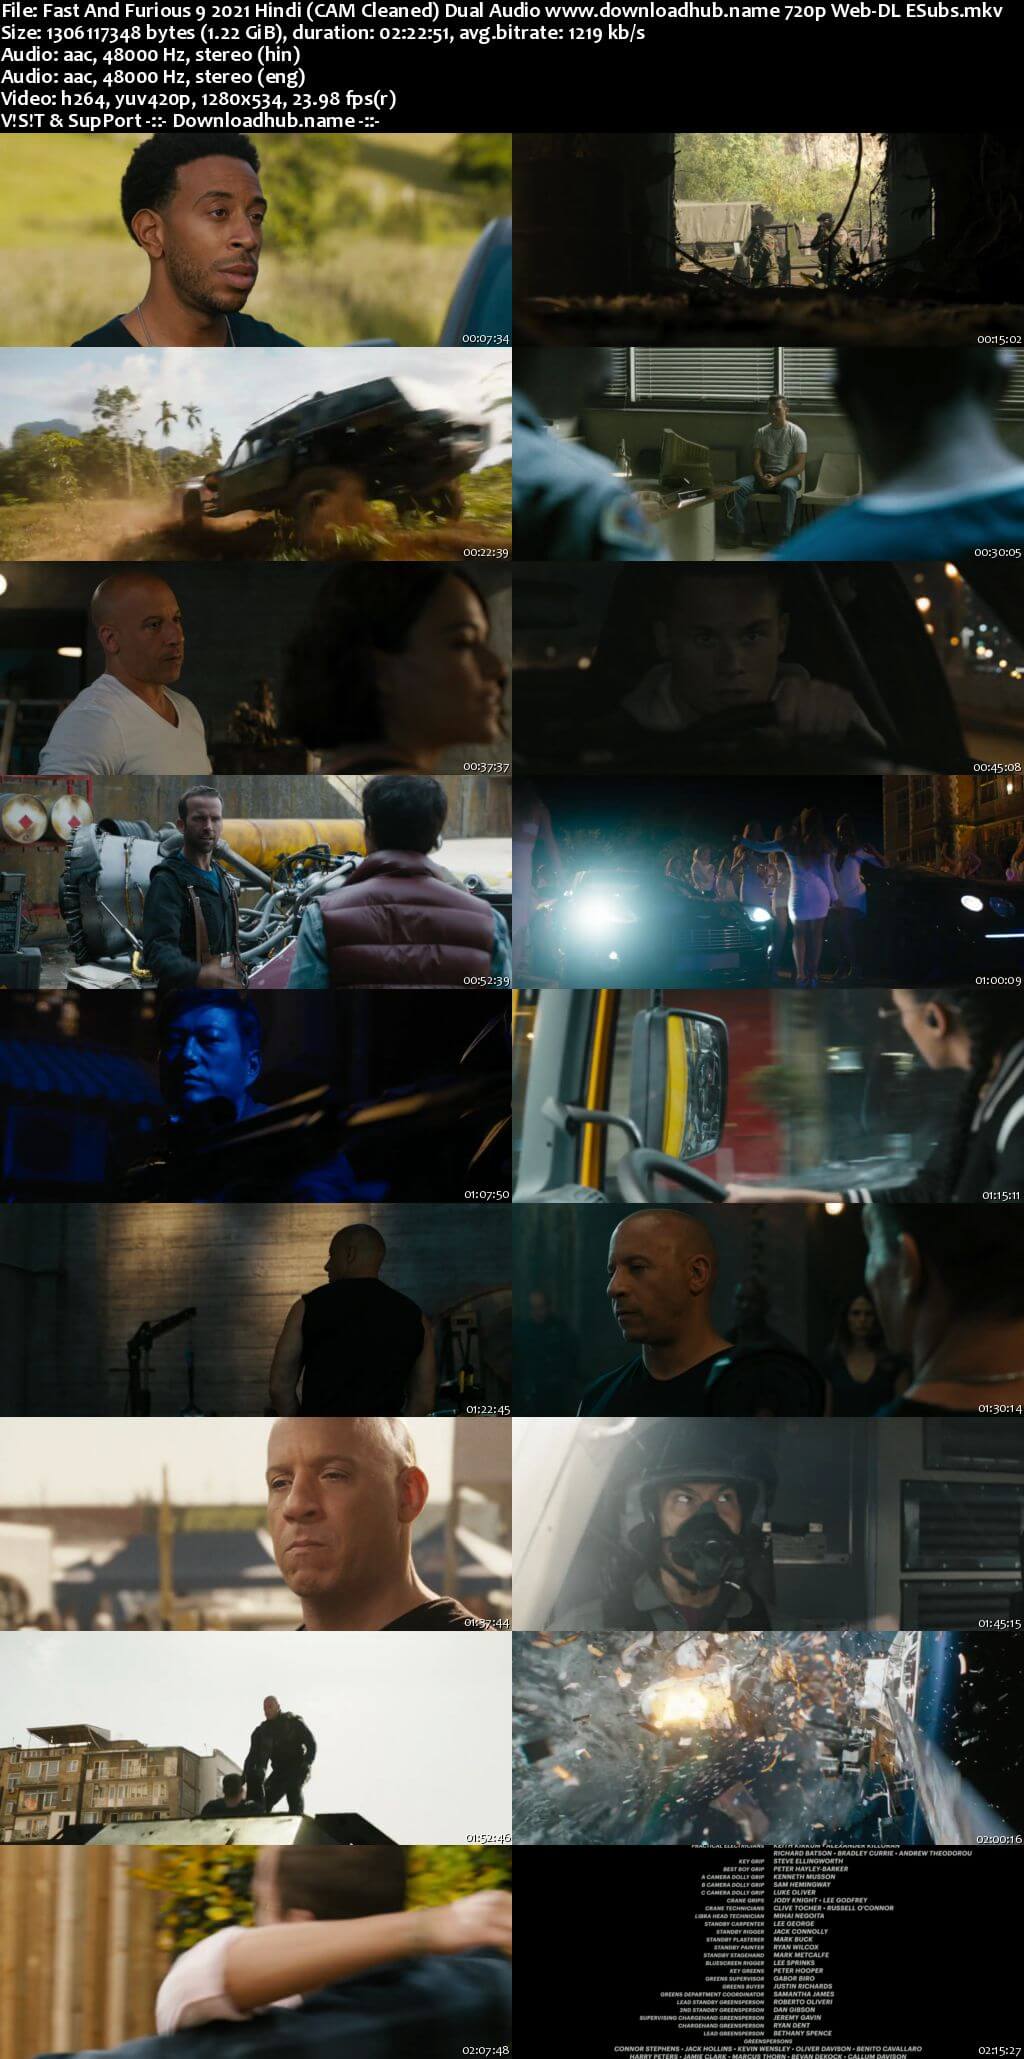 Fast And Furious 9 2021 Hindi (CAM Cleaned) Dual Audio 720p Web-DL ESubs